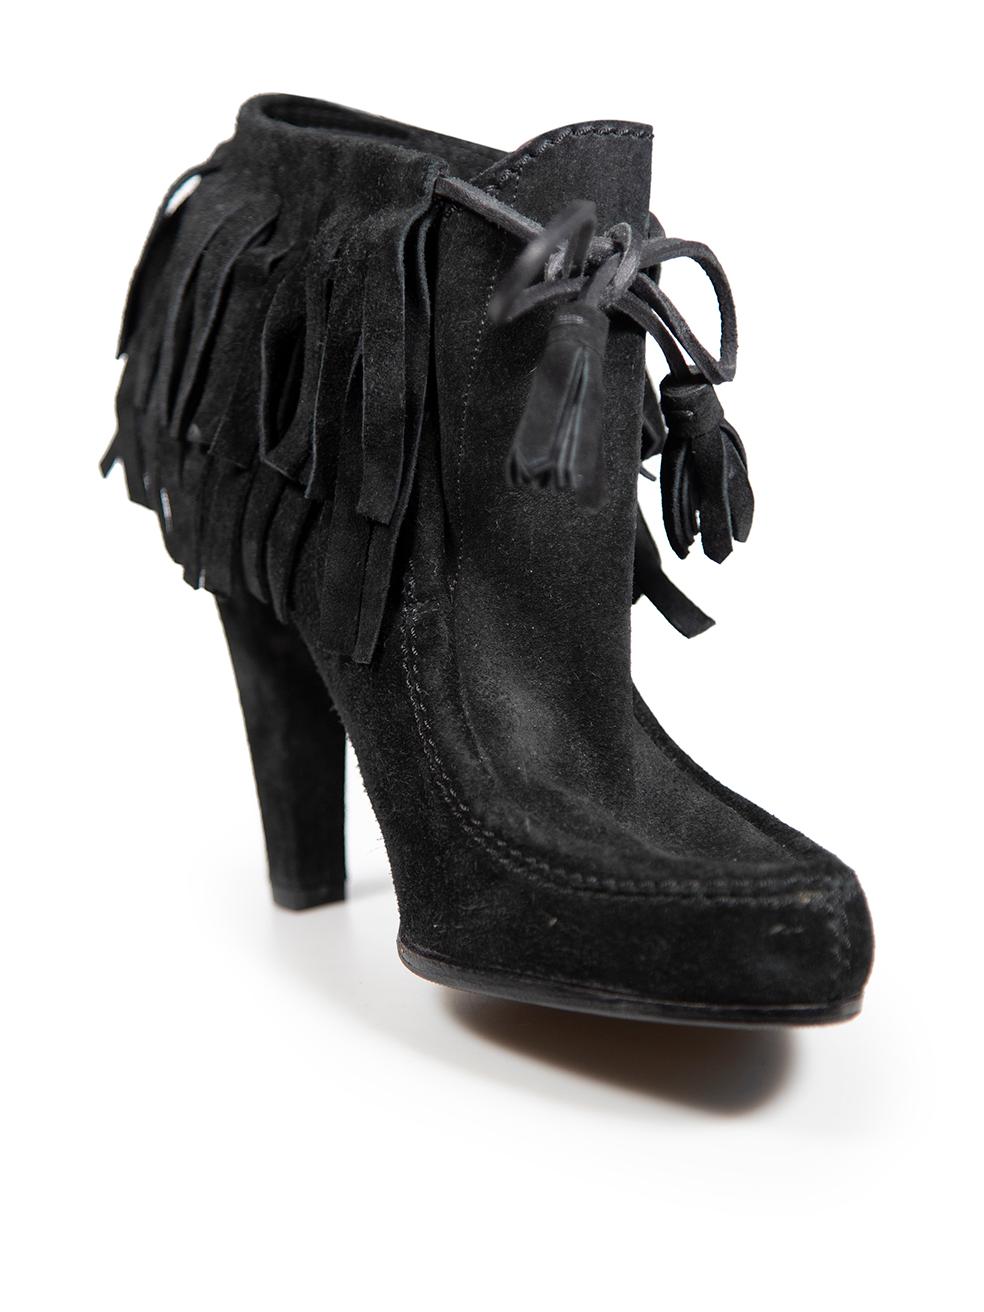 CONDITION is Very good. Minimal wear to boots is evident. Minimal wear to the uppers with some mild abrasion found throughout, particularly at the heels. Some of the fringing is also slightly creased and the outsoles have been partially resoled on